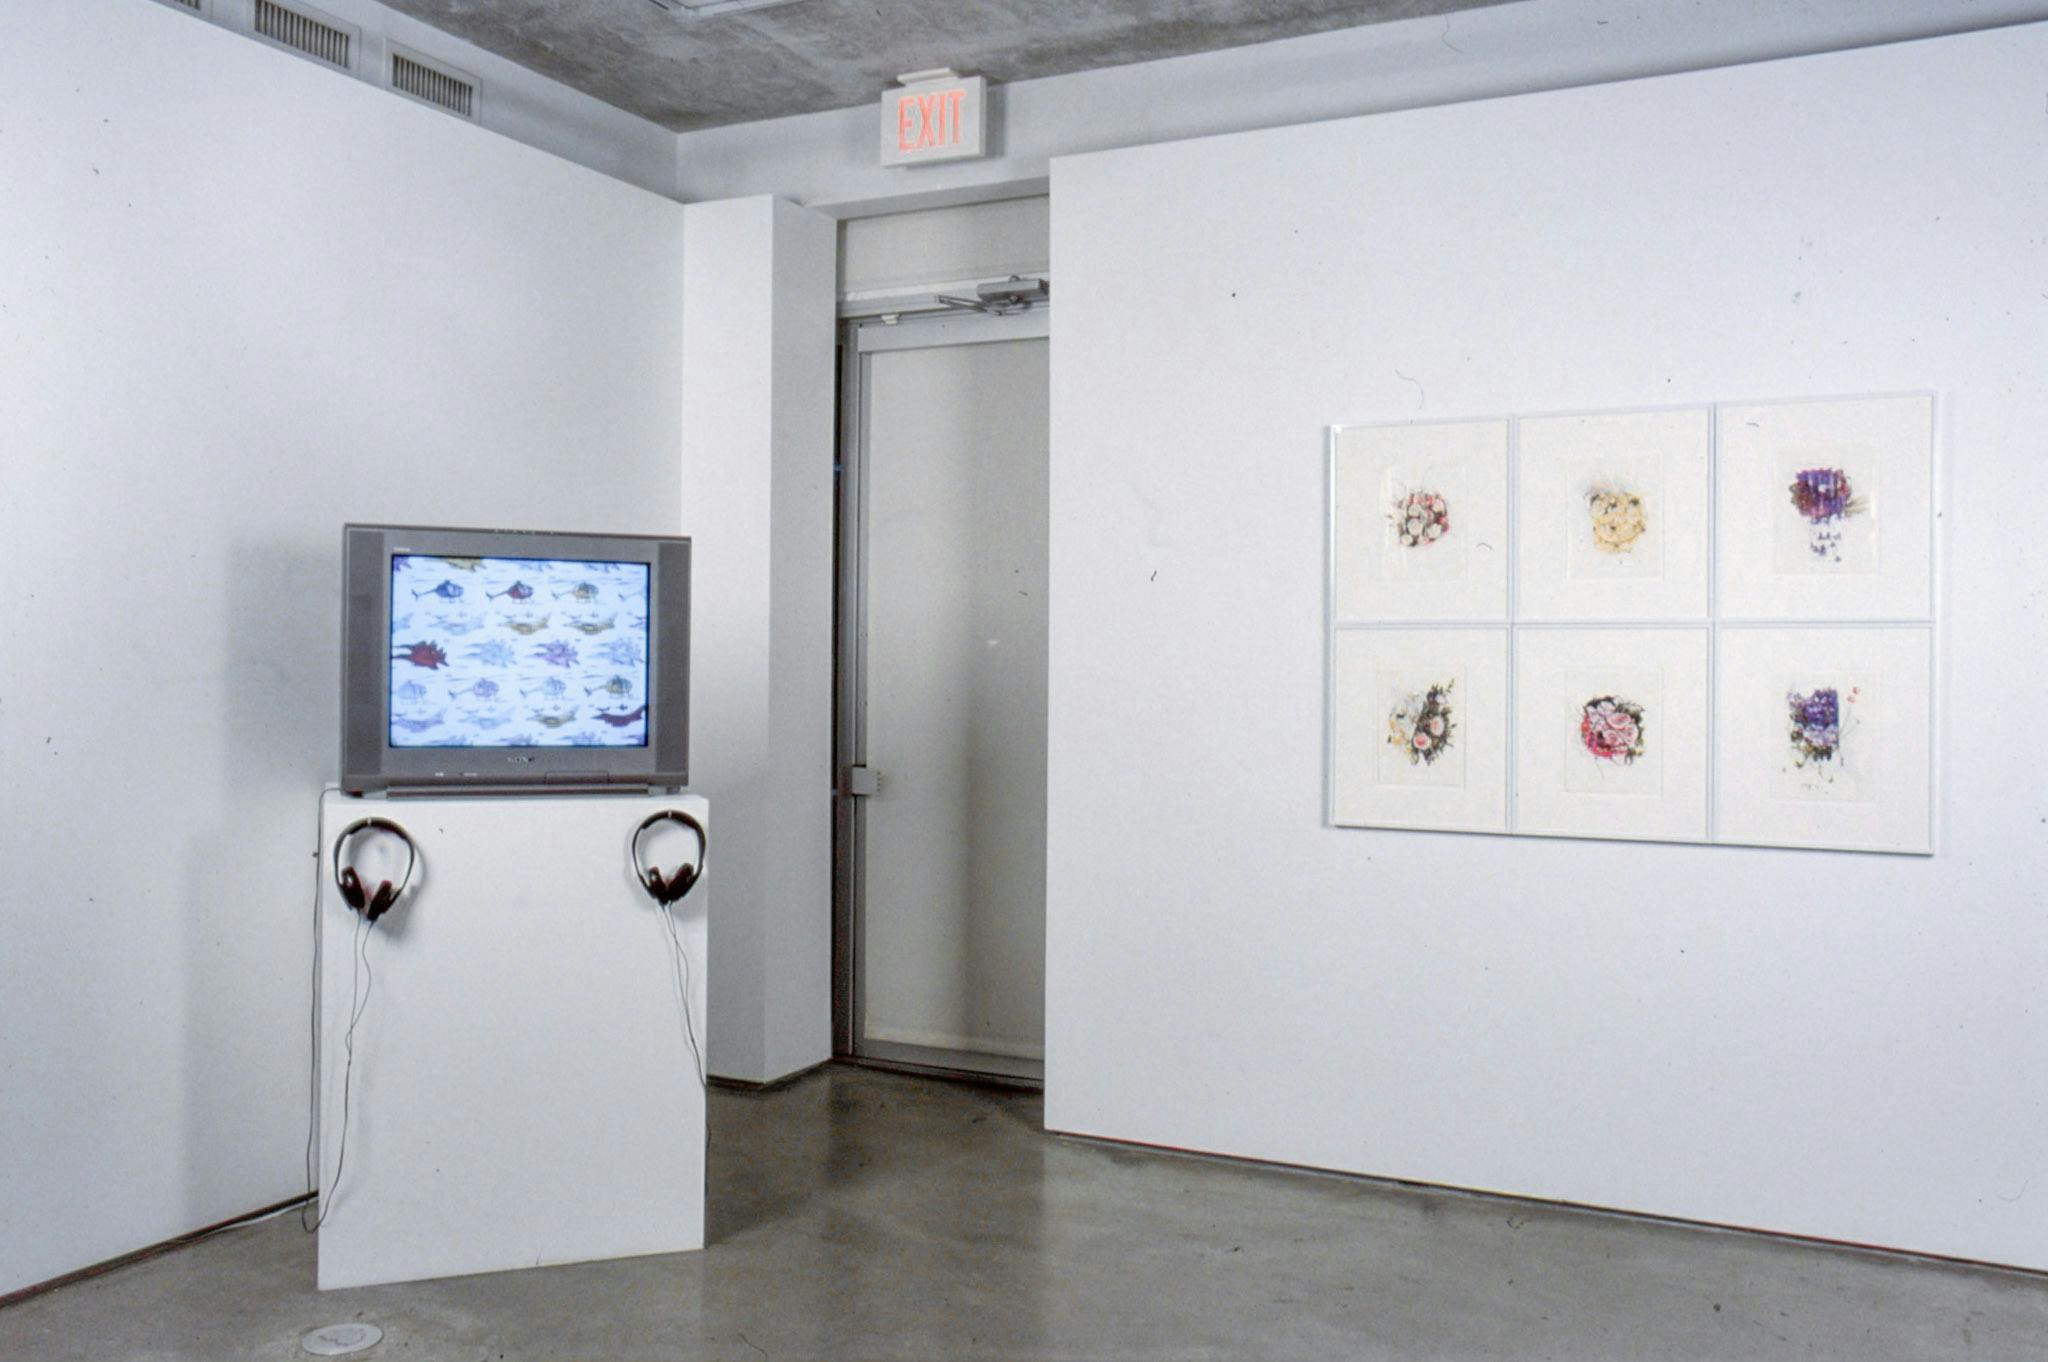 An installation image of artworks in a gallery. A CRT TV on a pedestal shows multiple drawings of aircraft. On a wall, six drawings of flowers are mounted. 